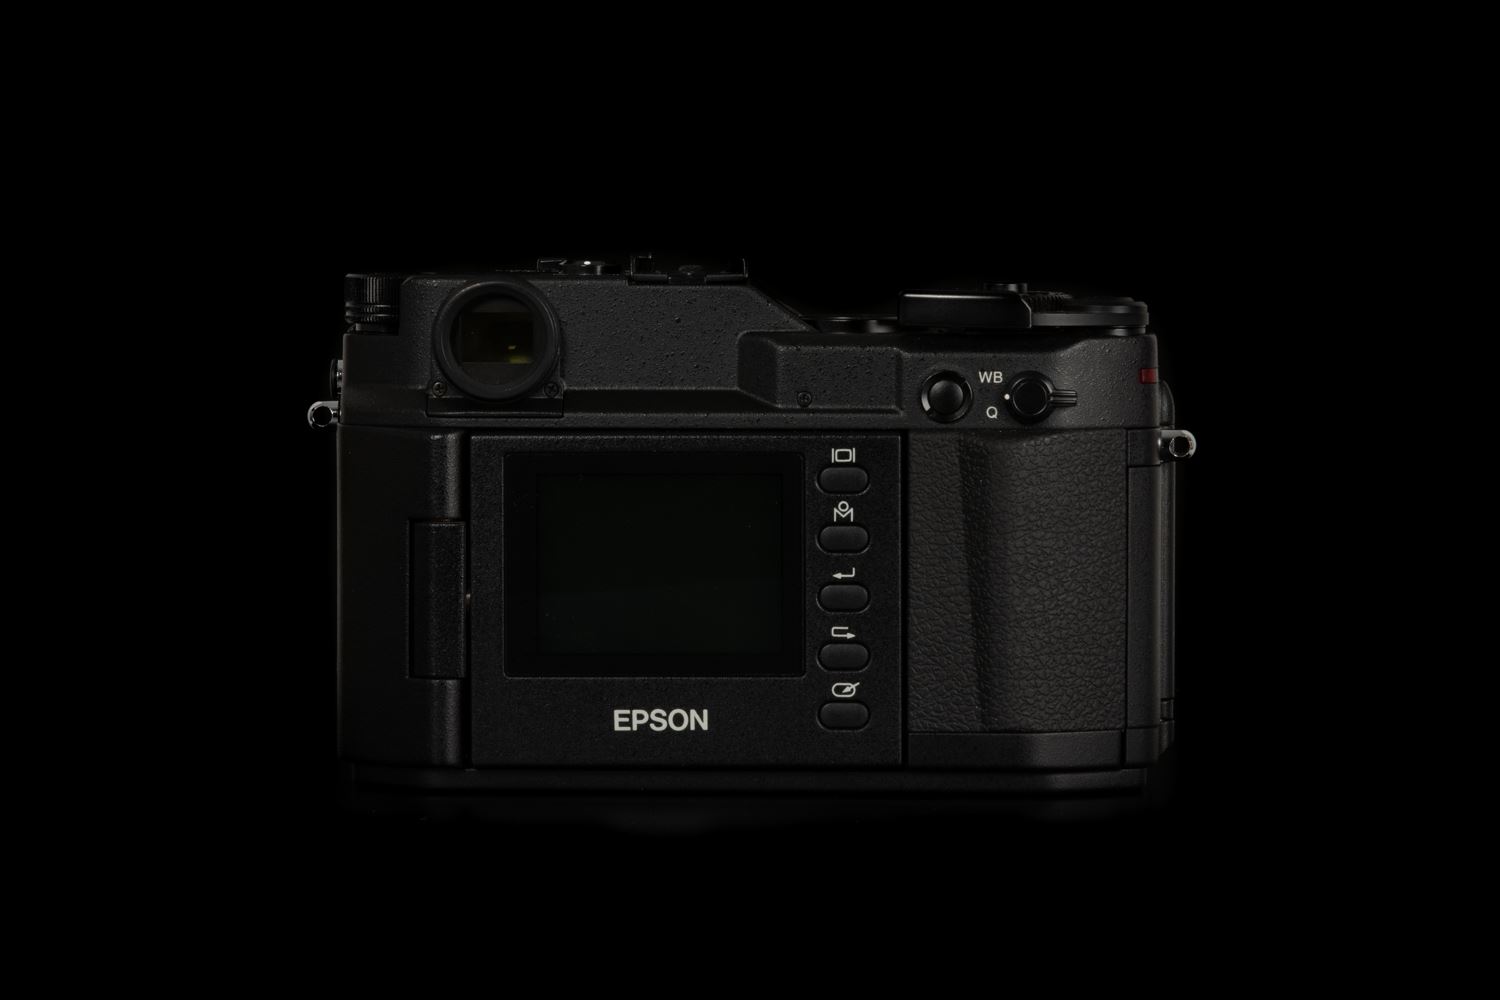 Picture of Epson Rangefinder Digital Camera R-D1S pre-production version